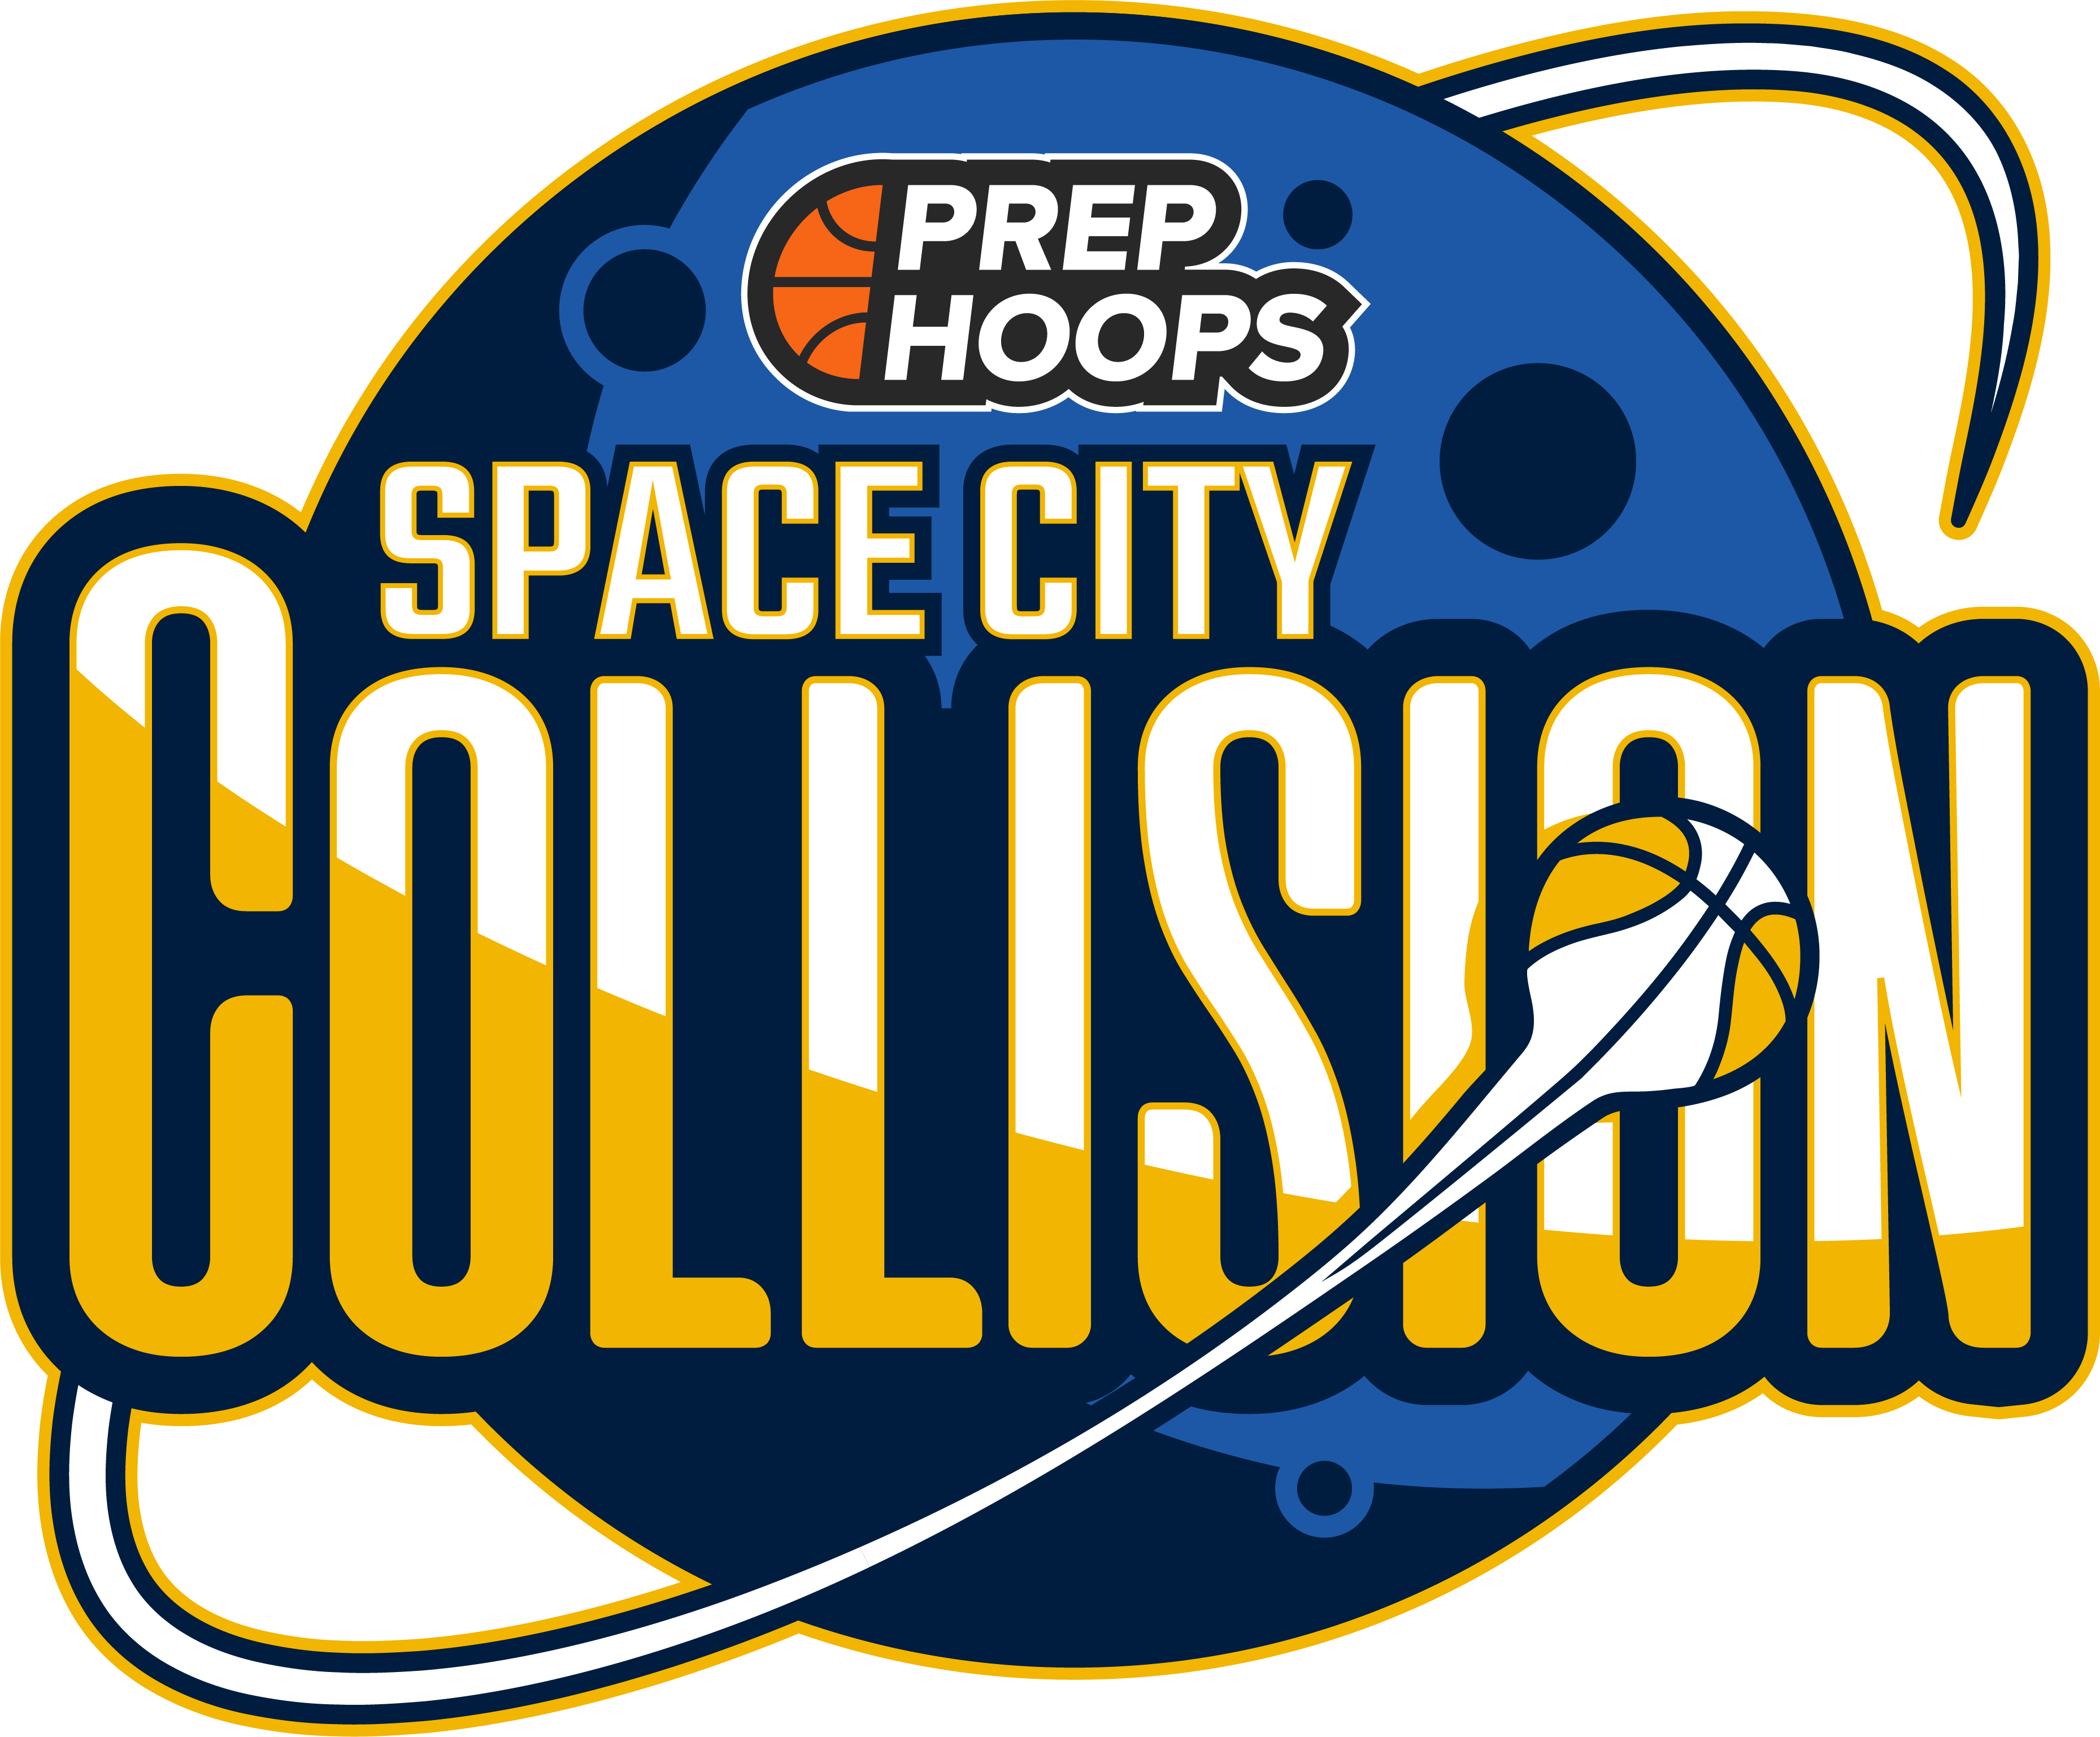 Space City Collision